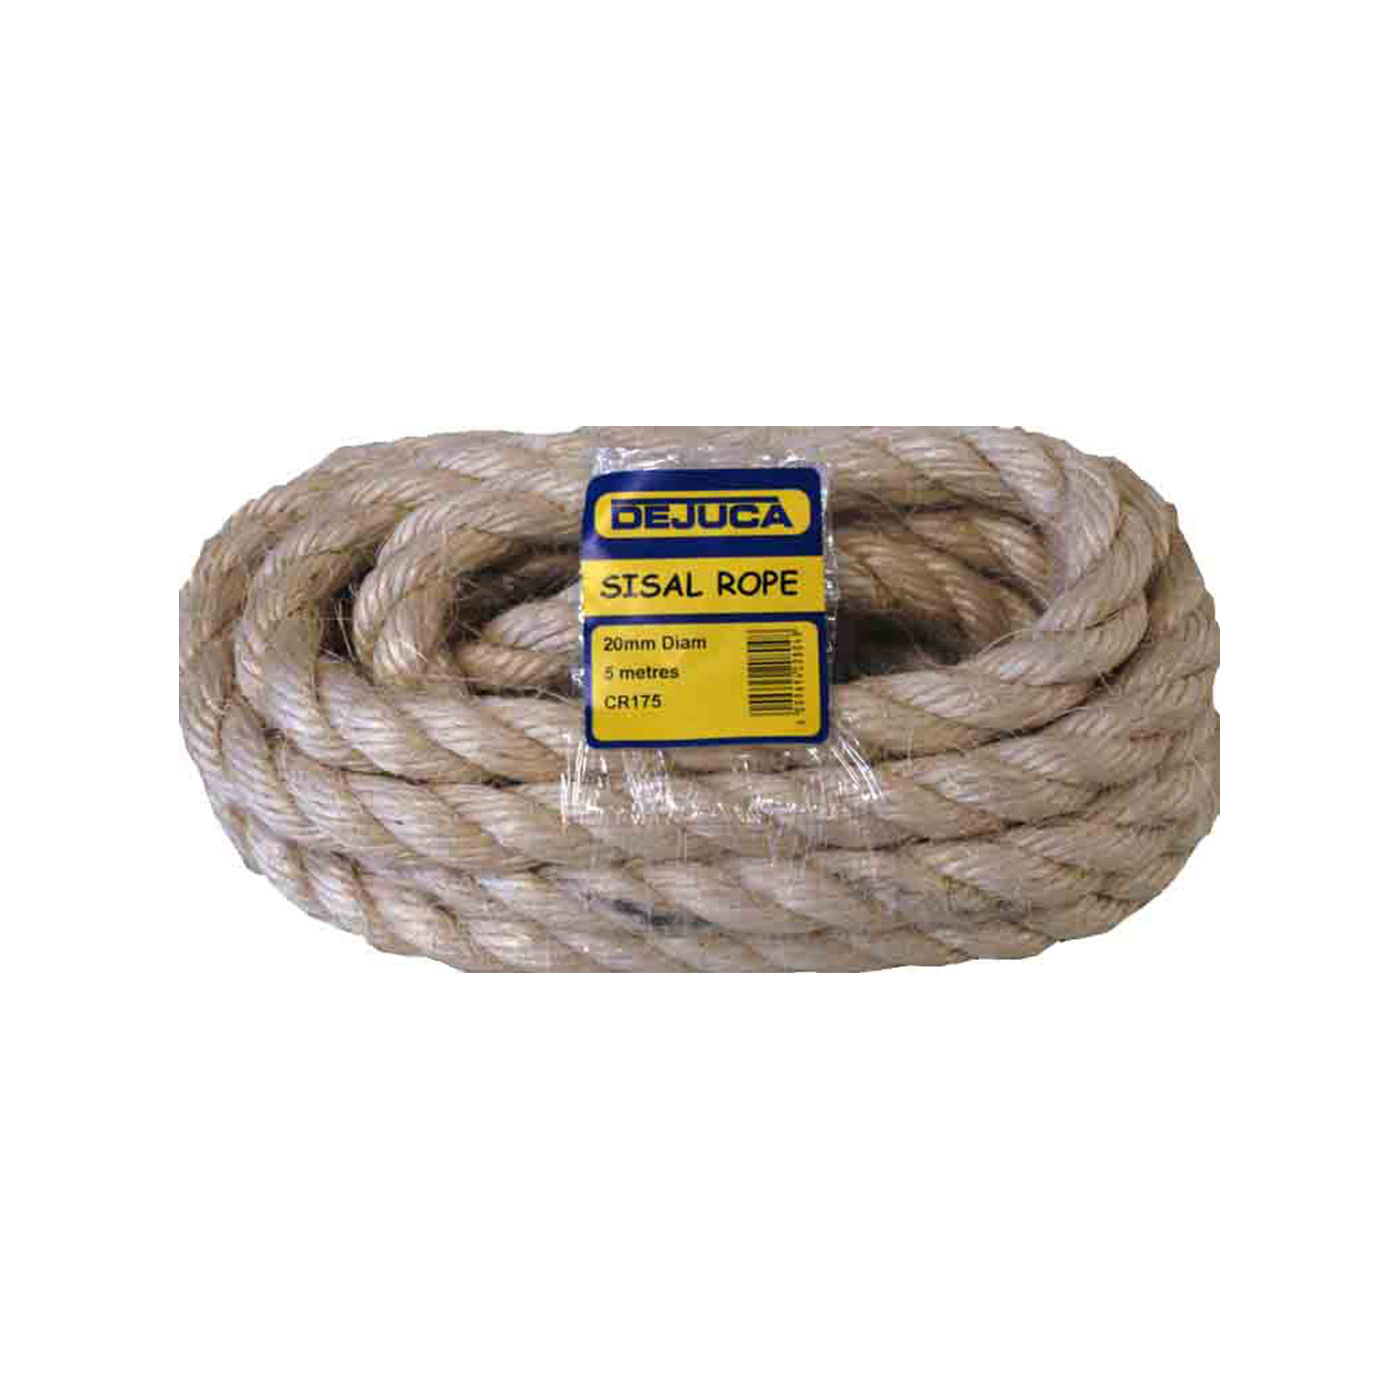 Tent Rope, Camping Rope Ultra Strong Universal 3.5mm Diameter Polyester  core Reflective 20m Length for Ourdoor